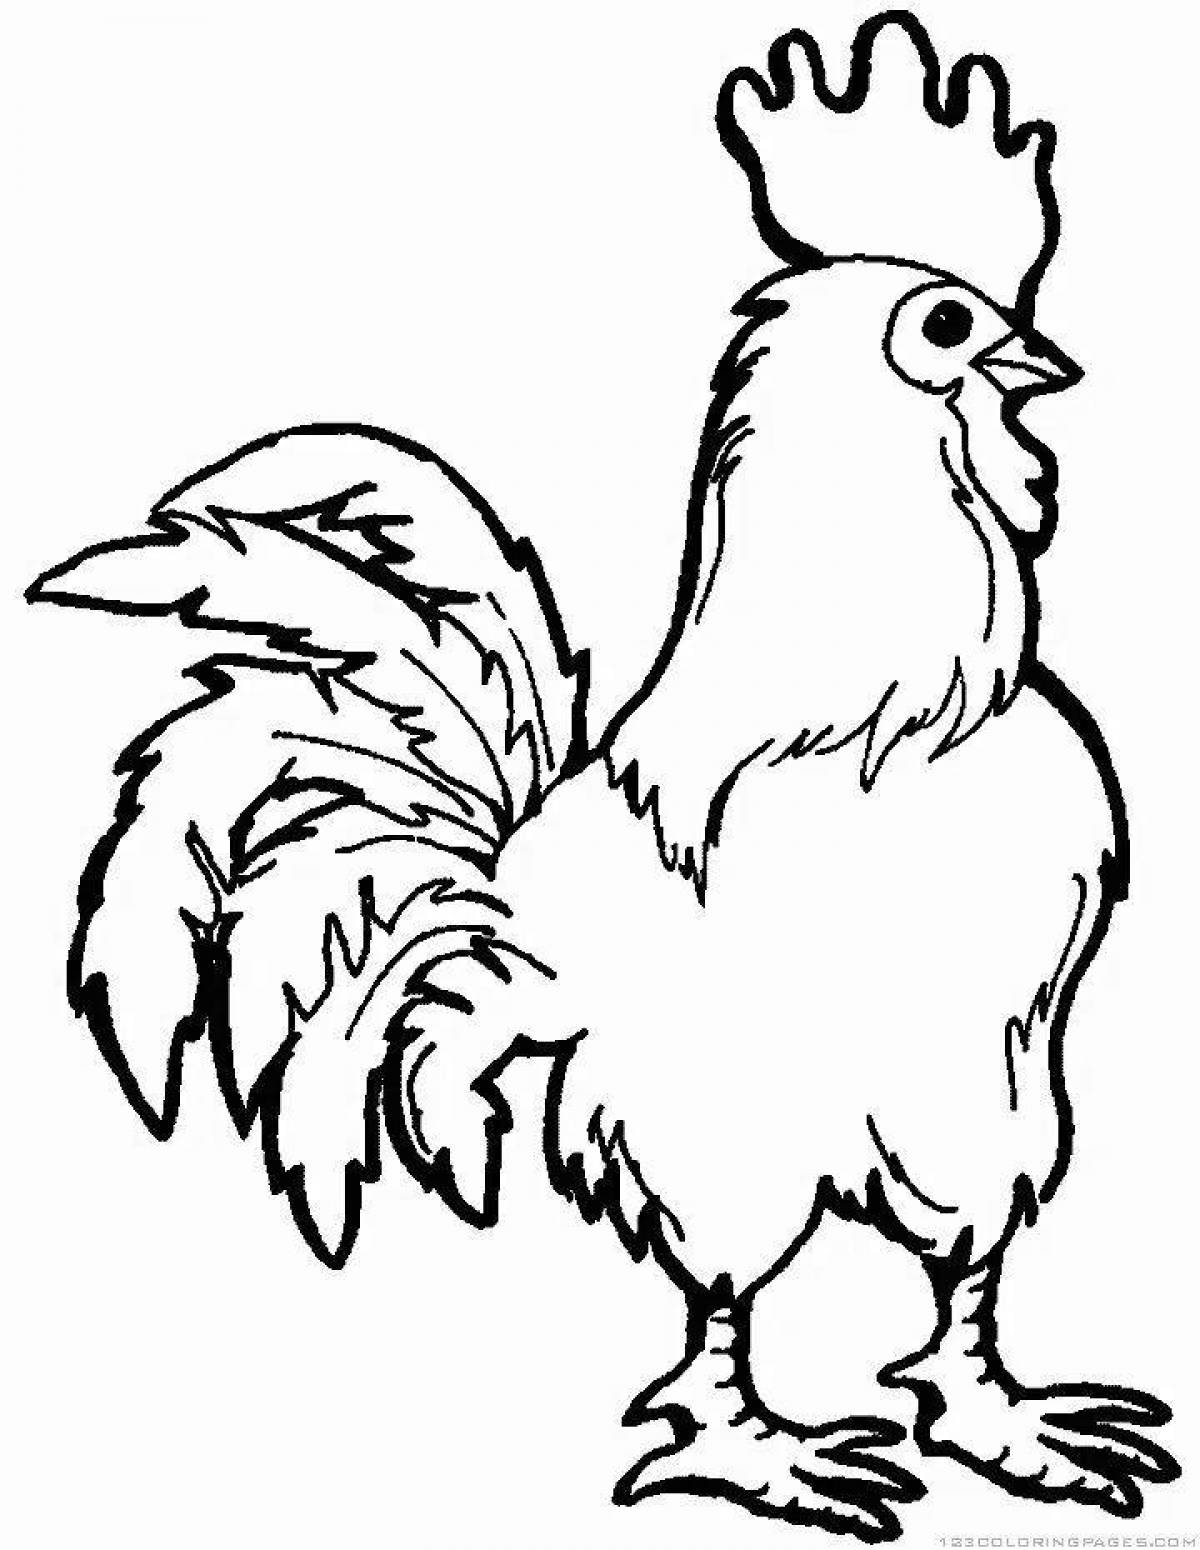 Coloring book smart rooster for kids